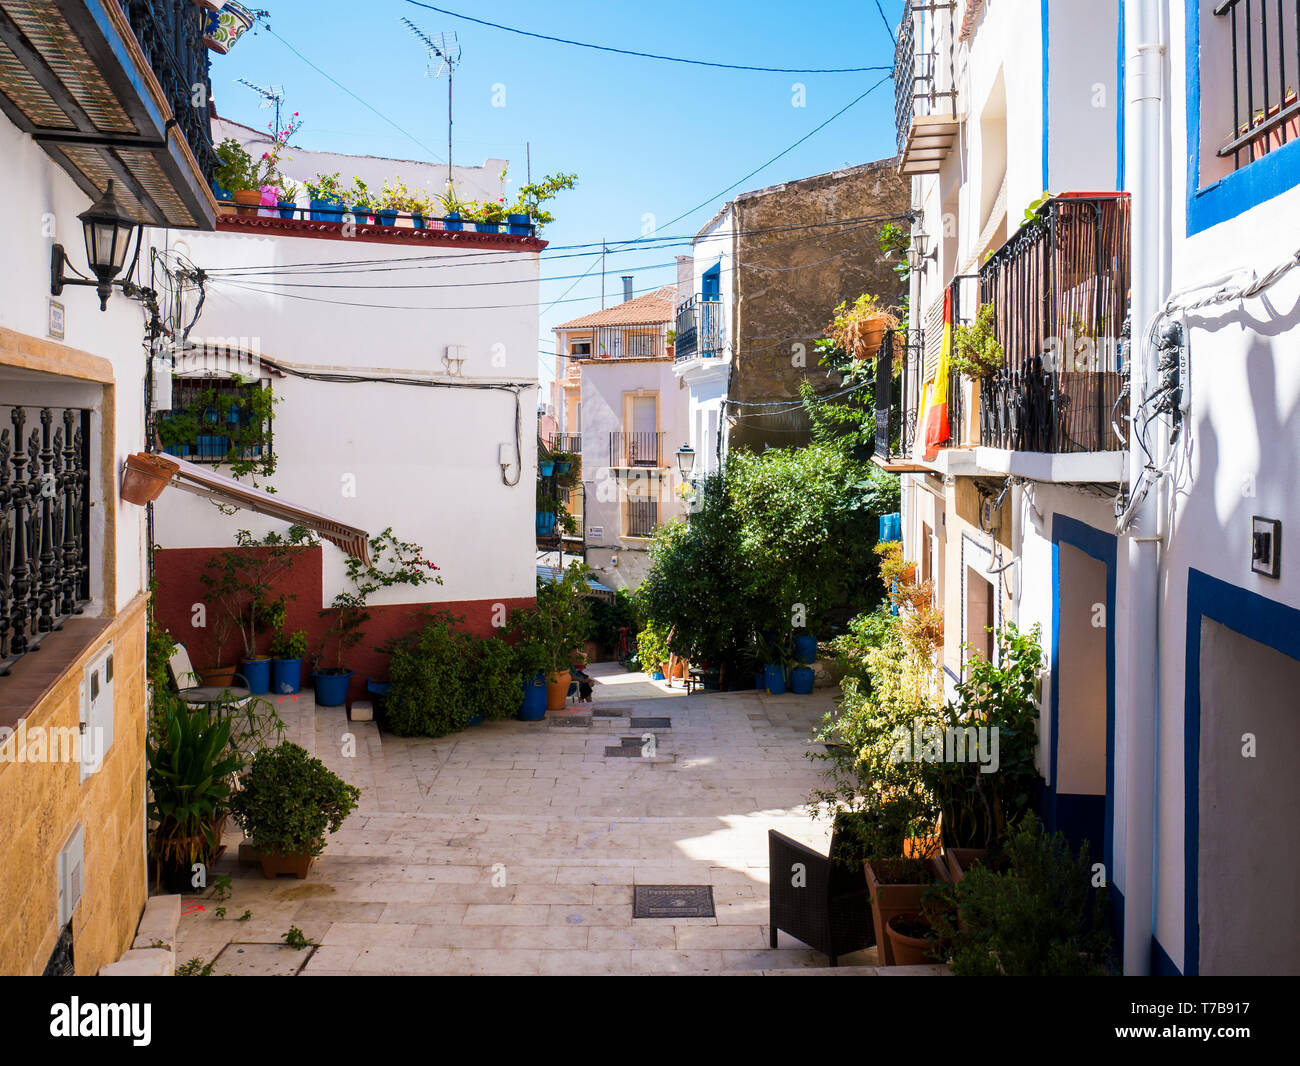 Calle San Rafael High Resolution Stock Photography and Images - Alamy